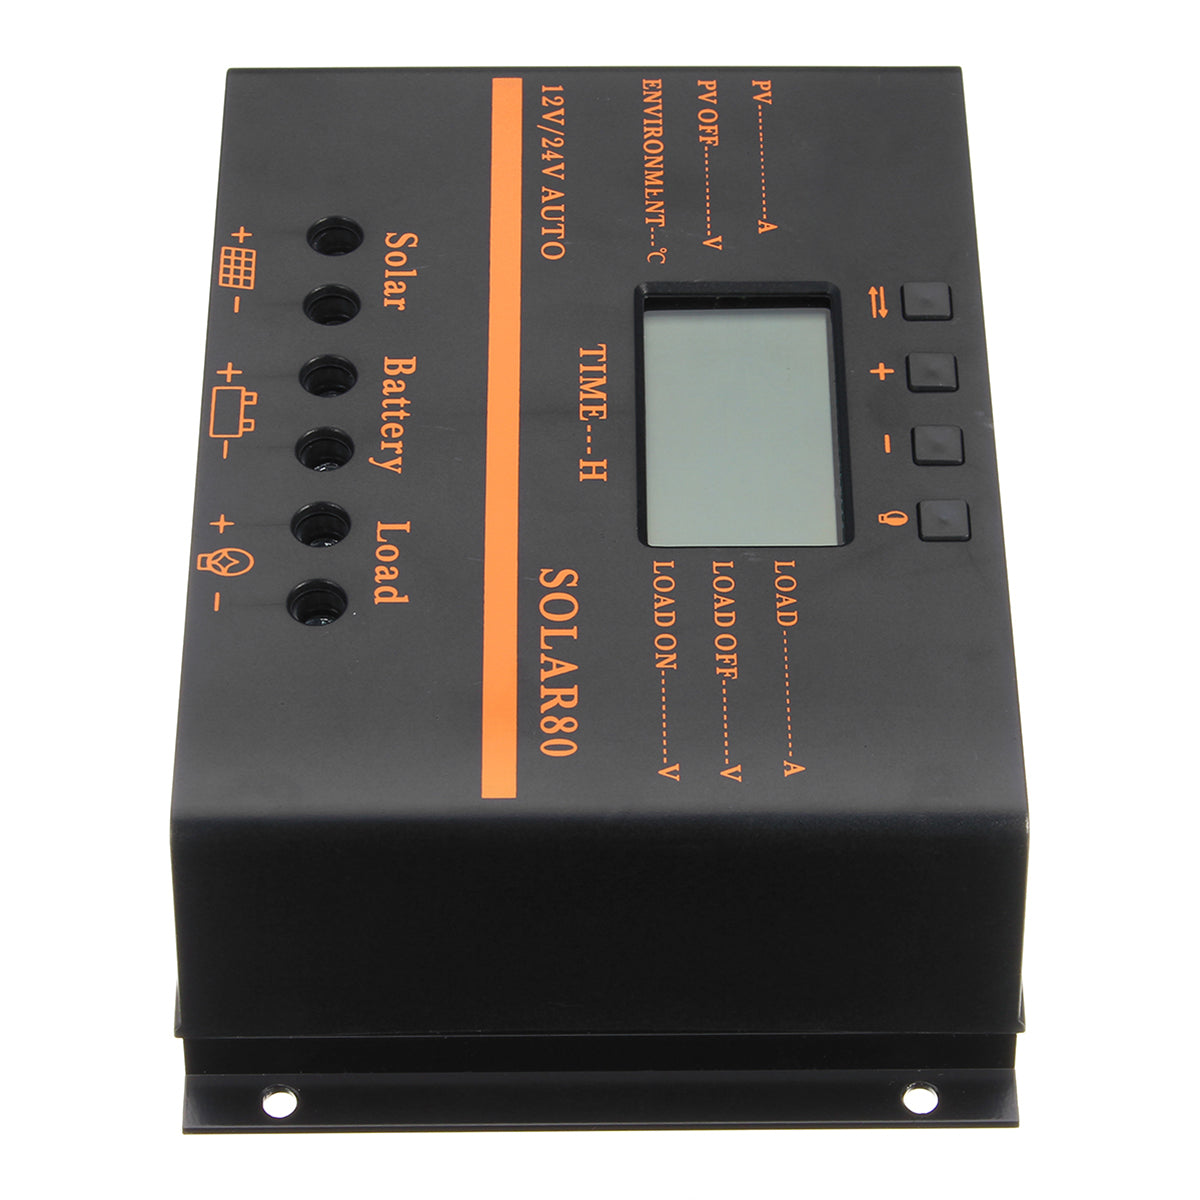 12V/24V 40A/50A/60A/80A PWM Solar Controller LCD Function 5V DC Solar Panel Battery Charge Regulator